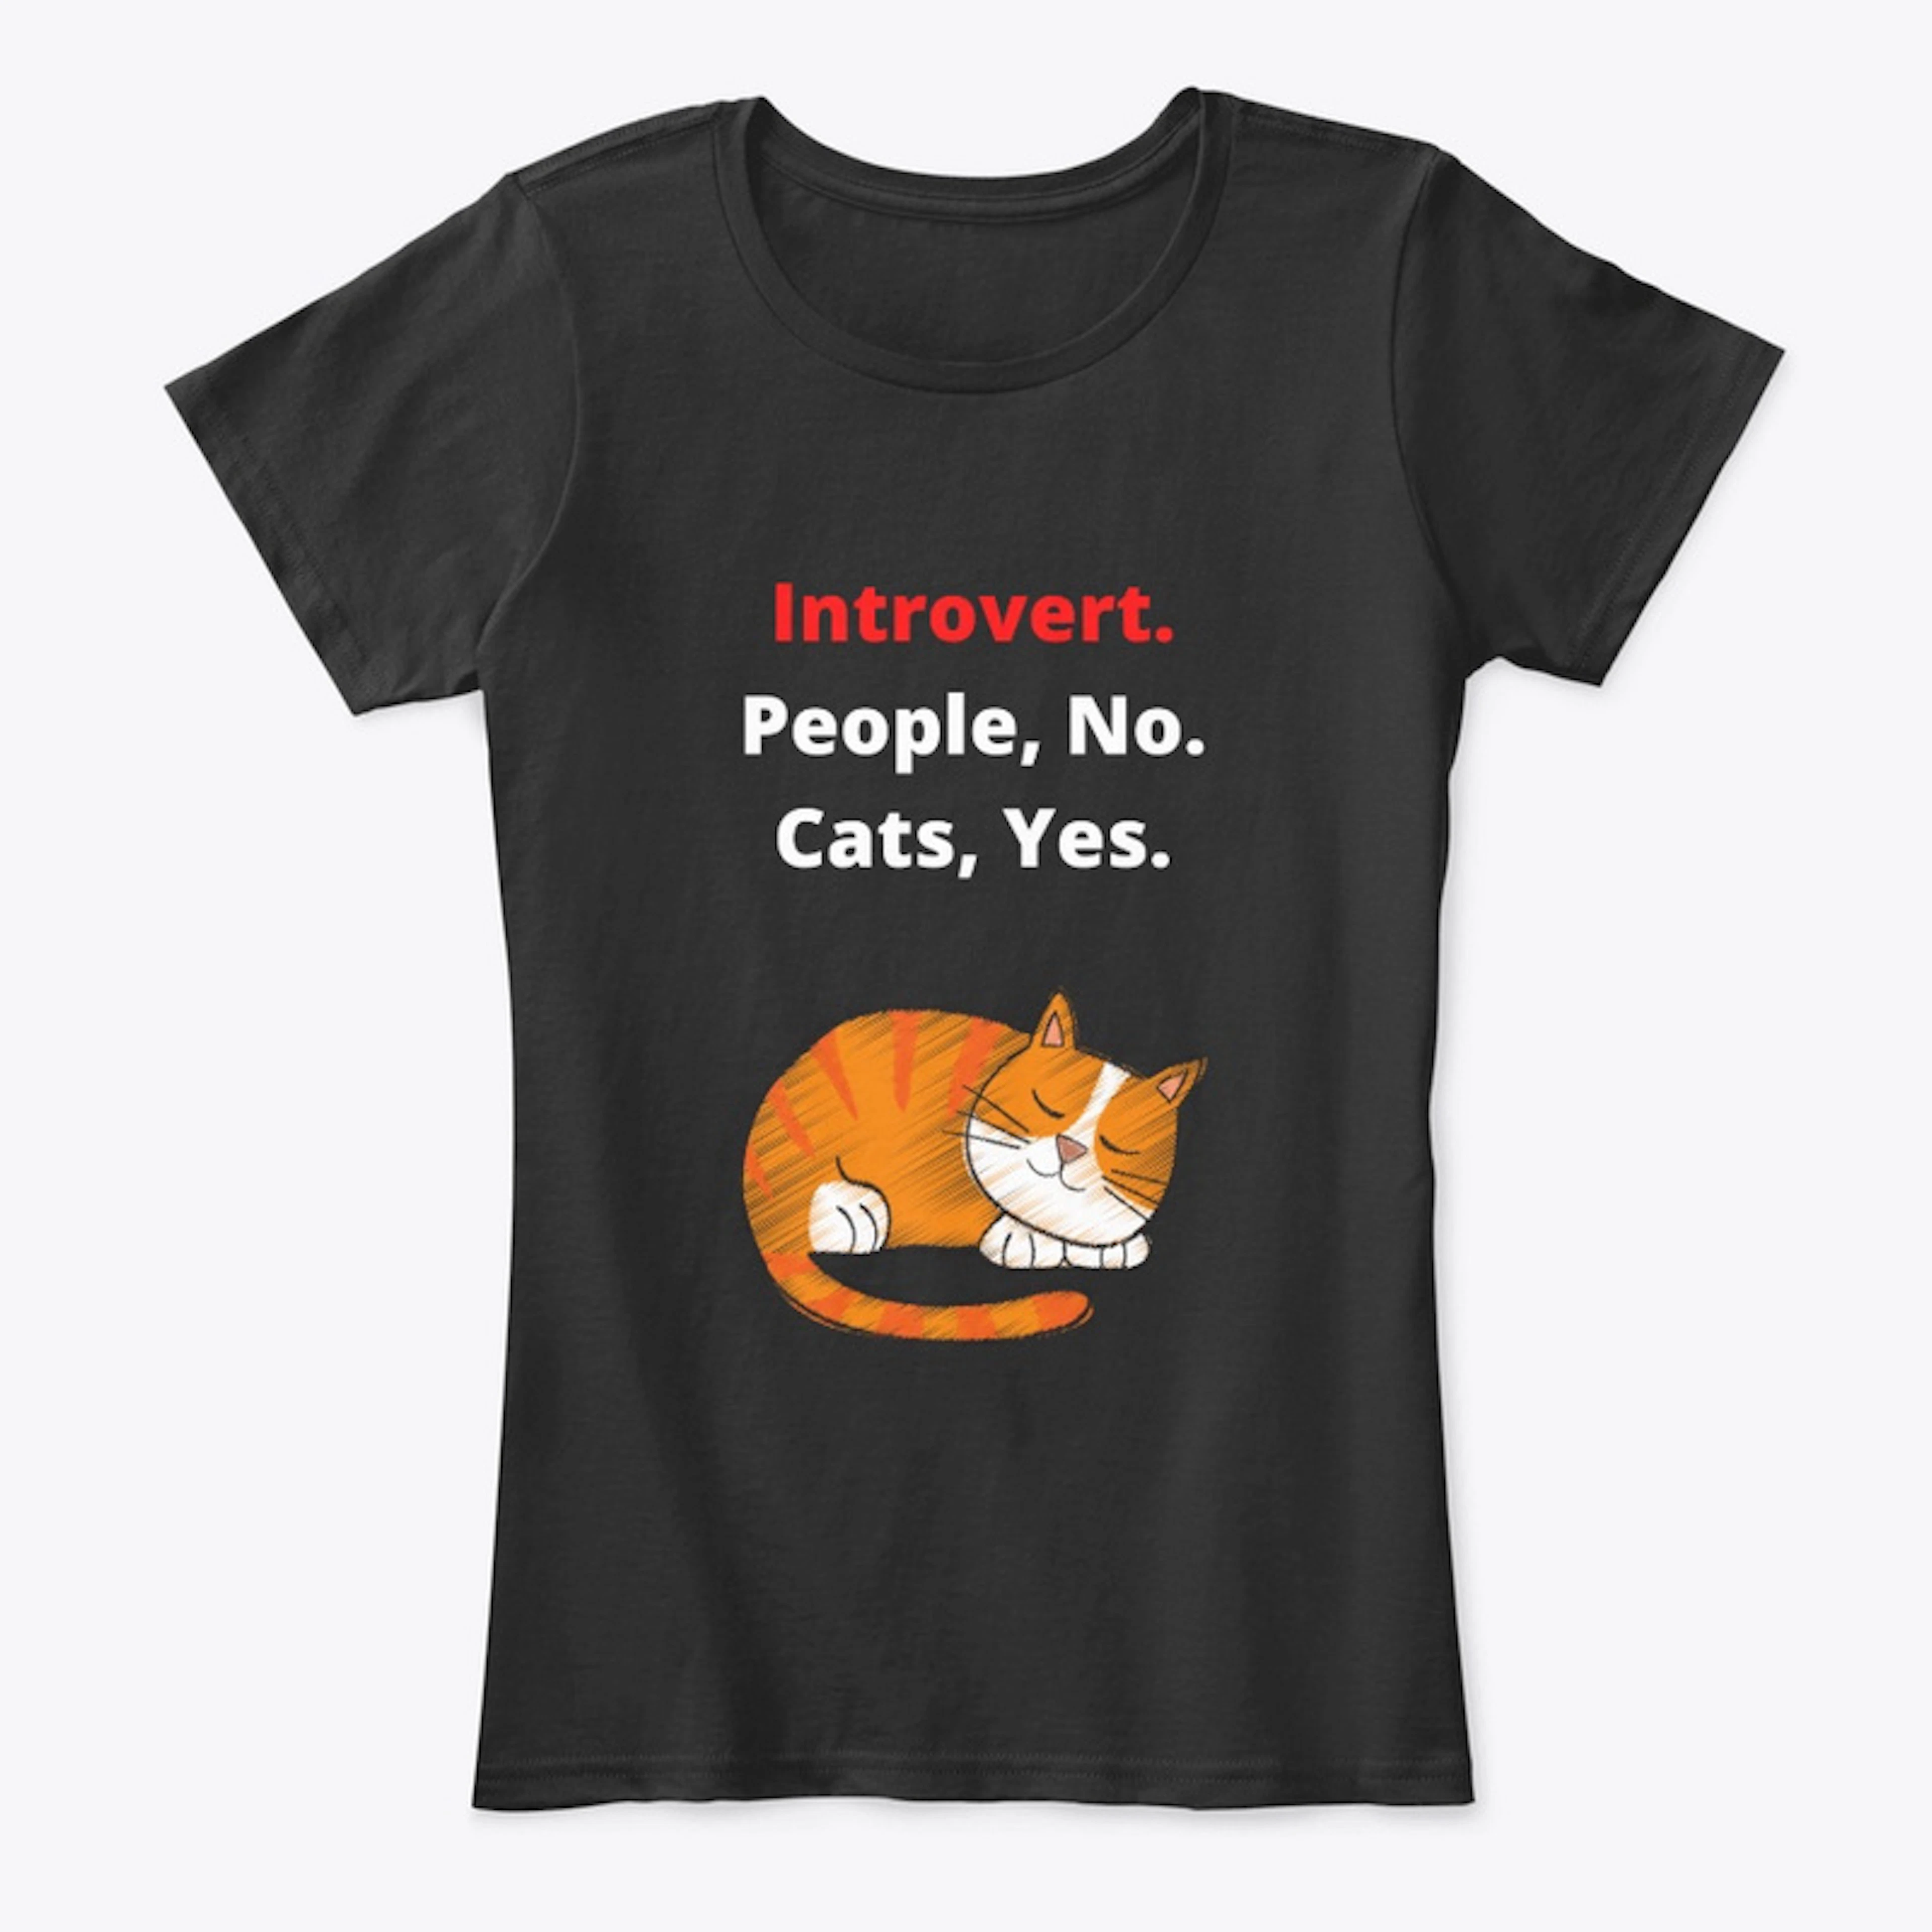 cats, yes. people, no.